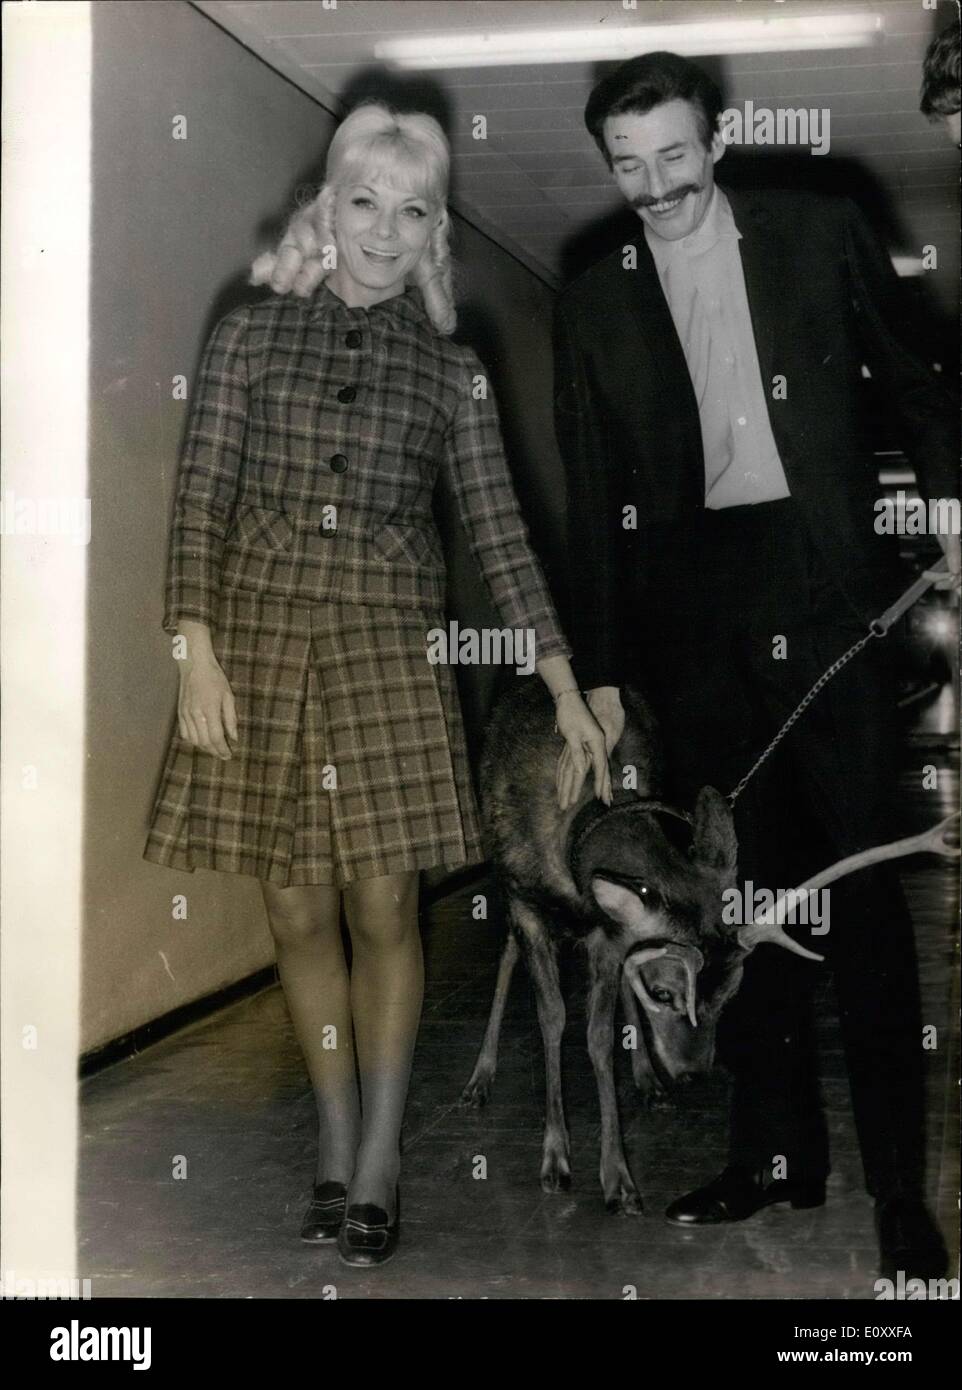 Mar. 17, 1968 - Isabelle Aubret, Jean Ferrat and Bambi at the Television Studio Stock Photo